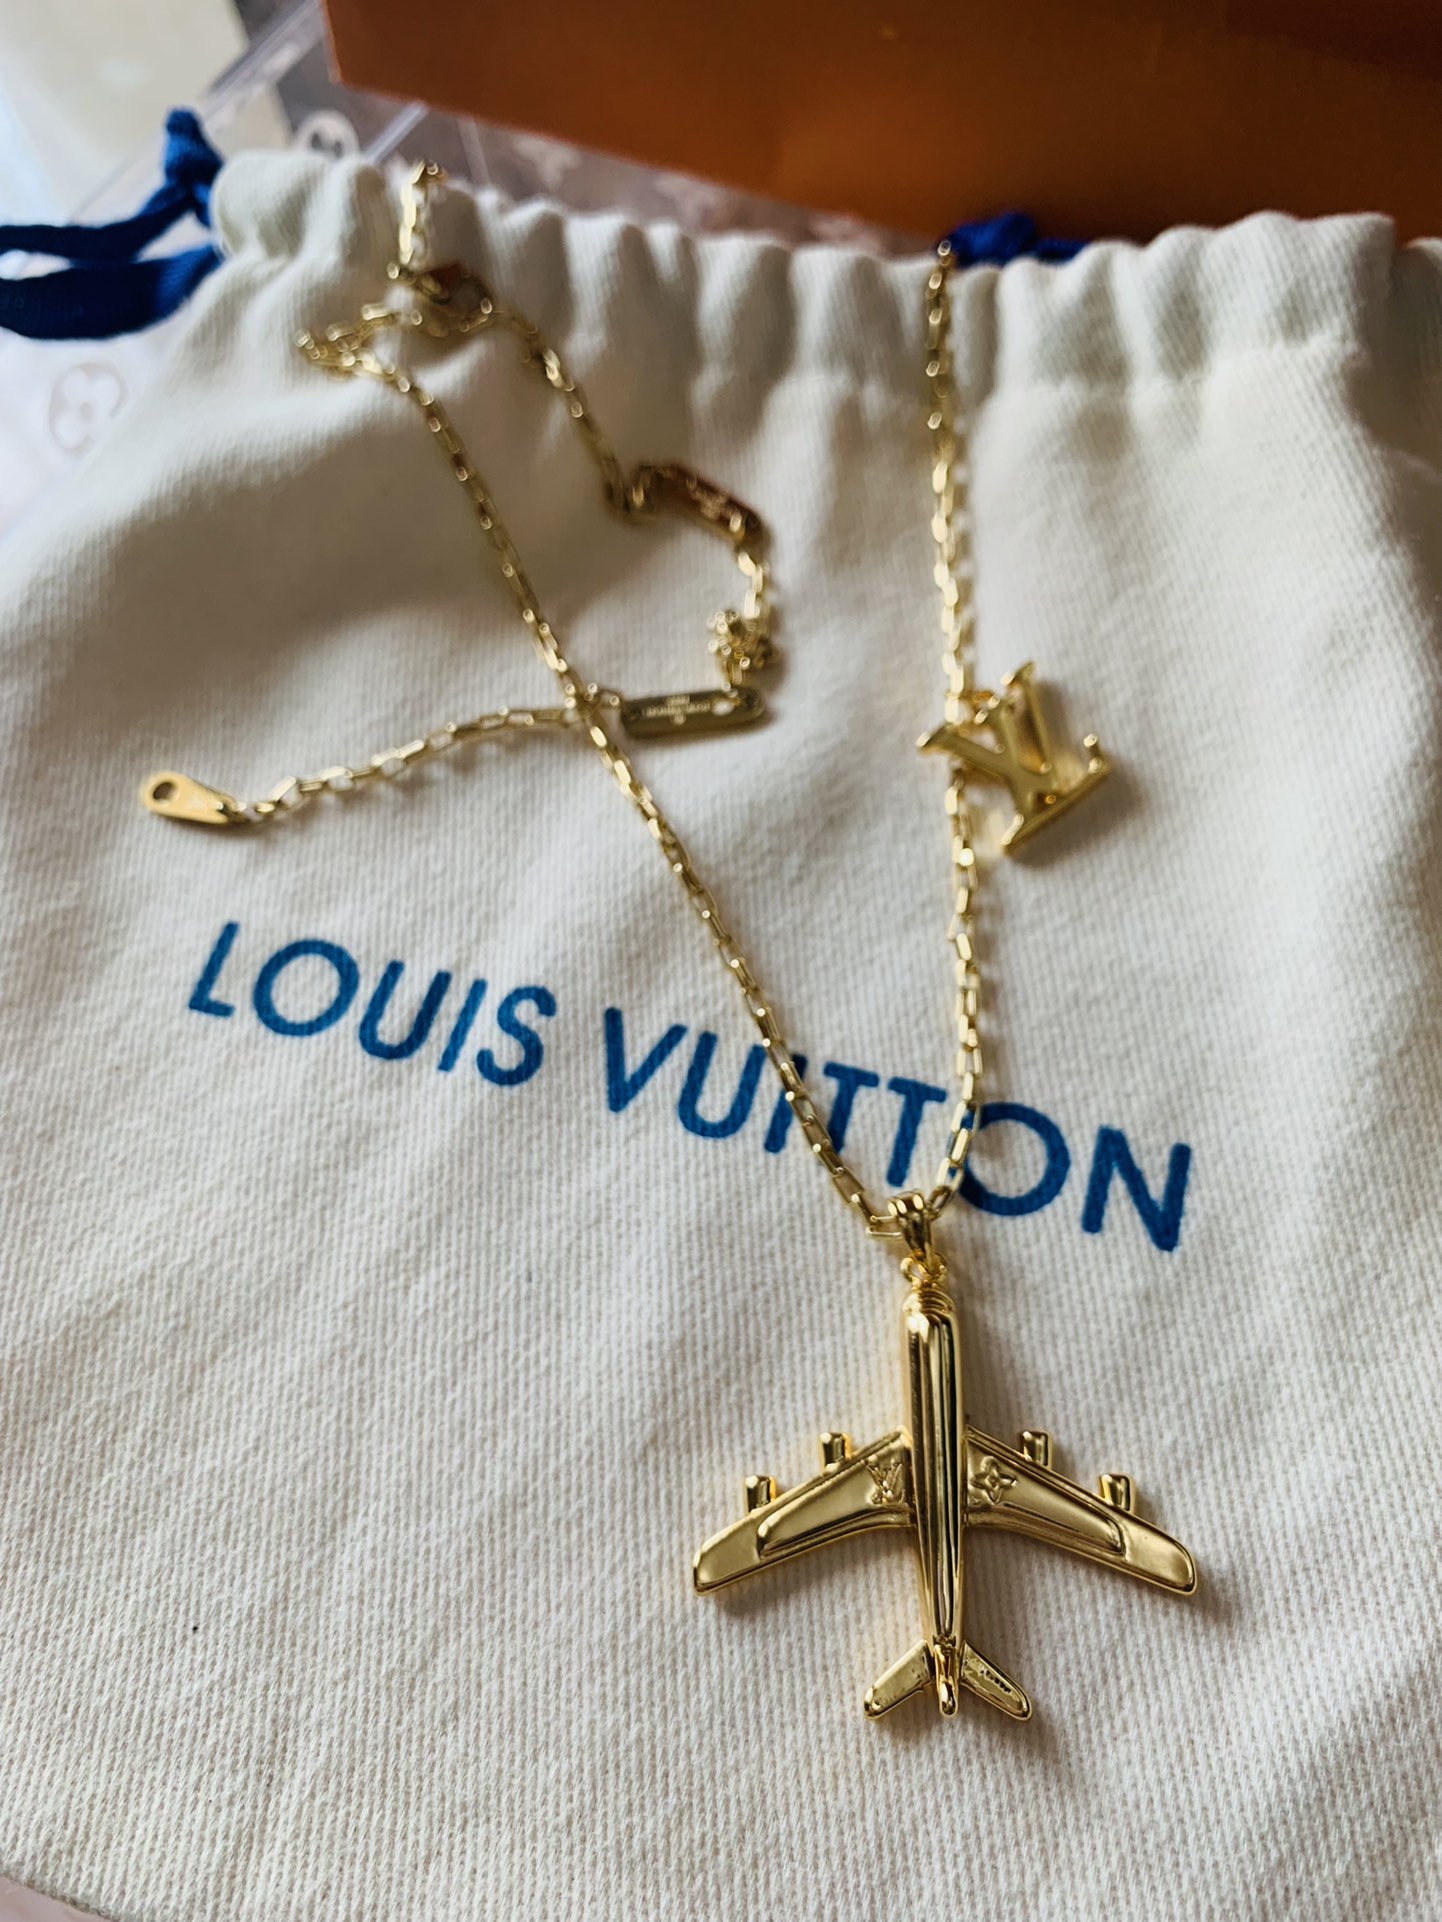 LV airplane necklace/chain from Survivalsource for 135¥ link under image.  Detailed review in the comments : r/DesignerReps